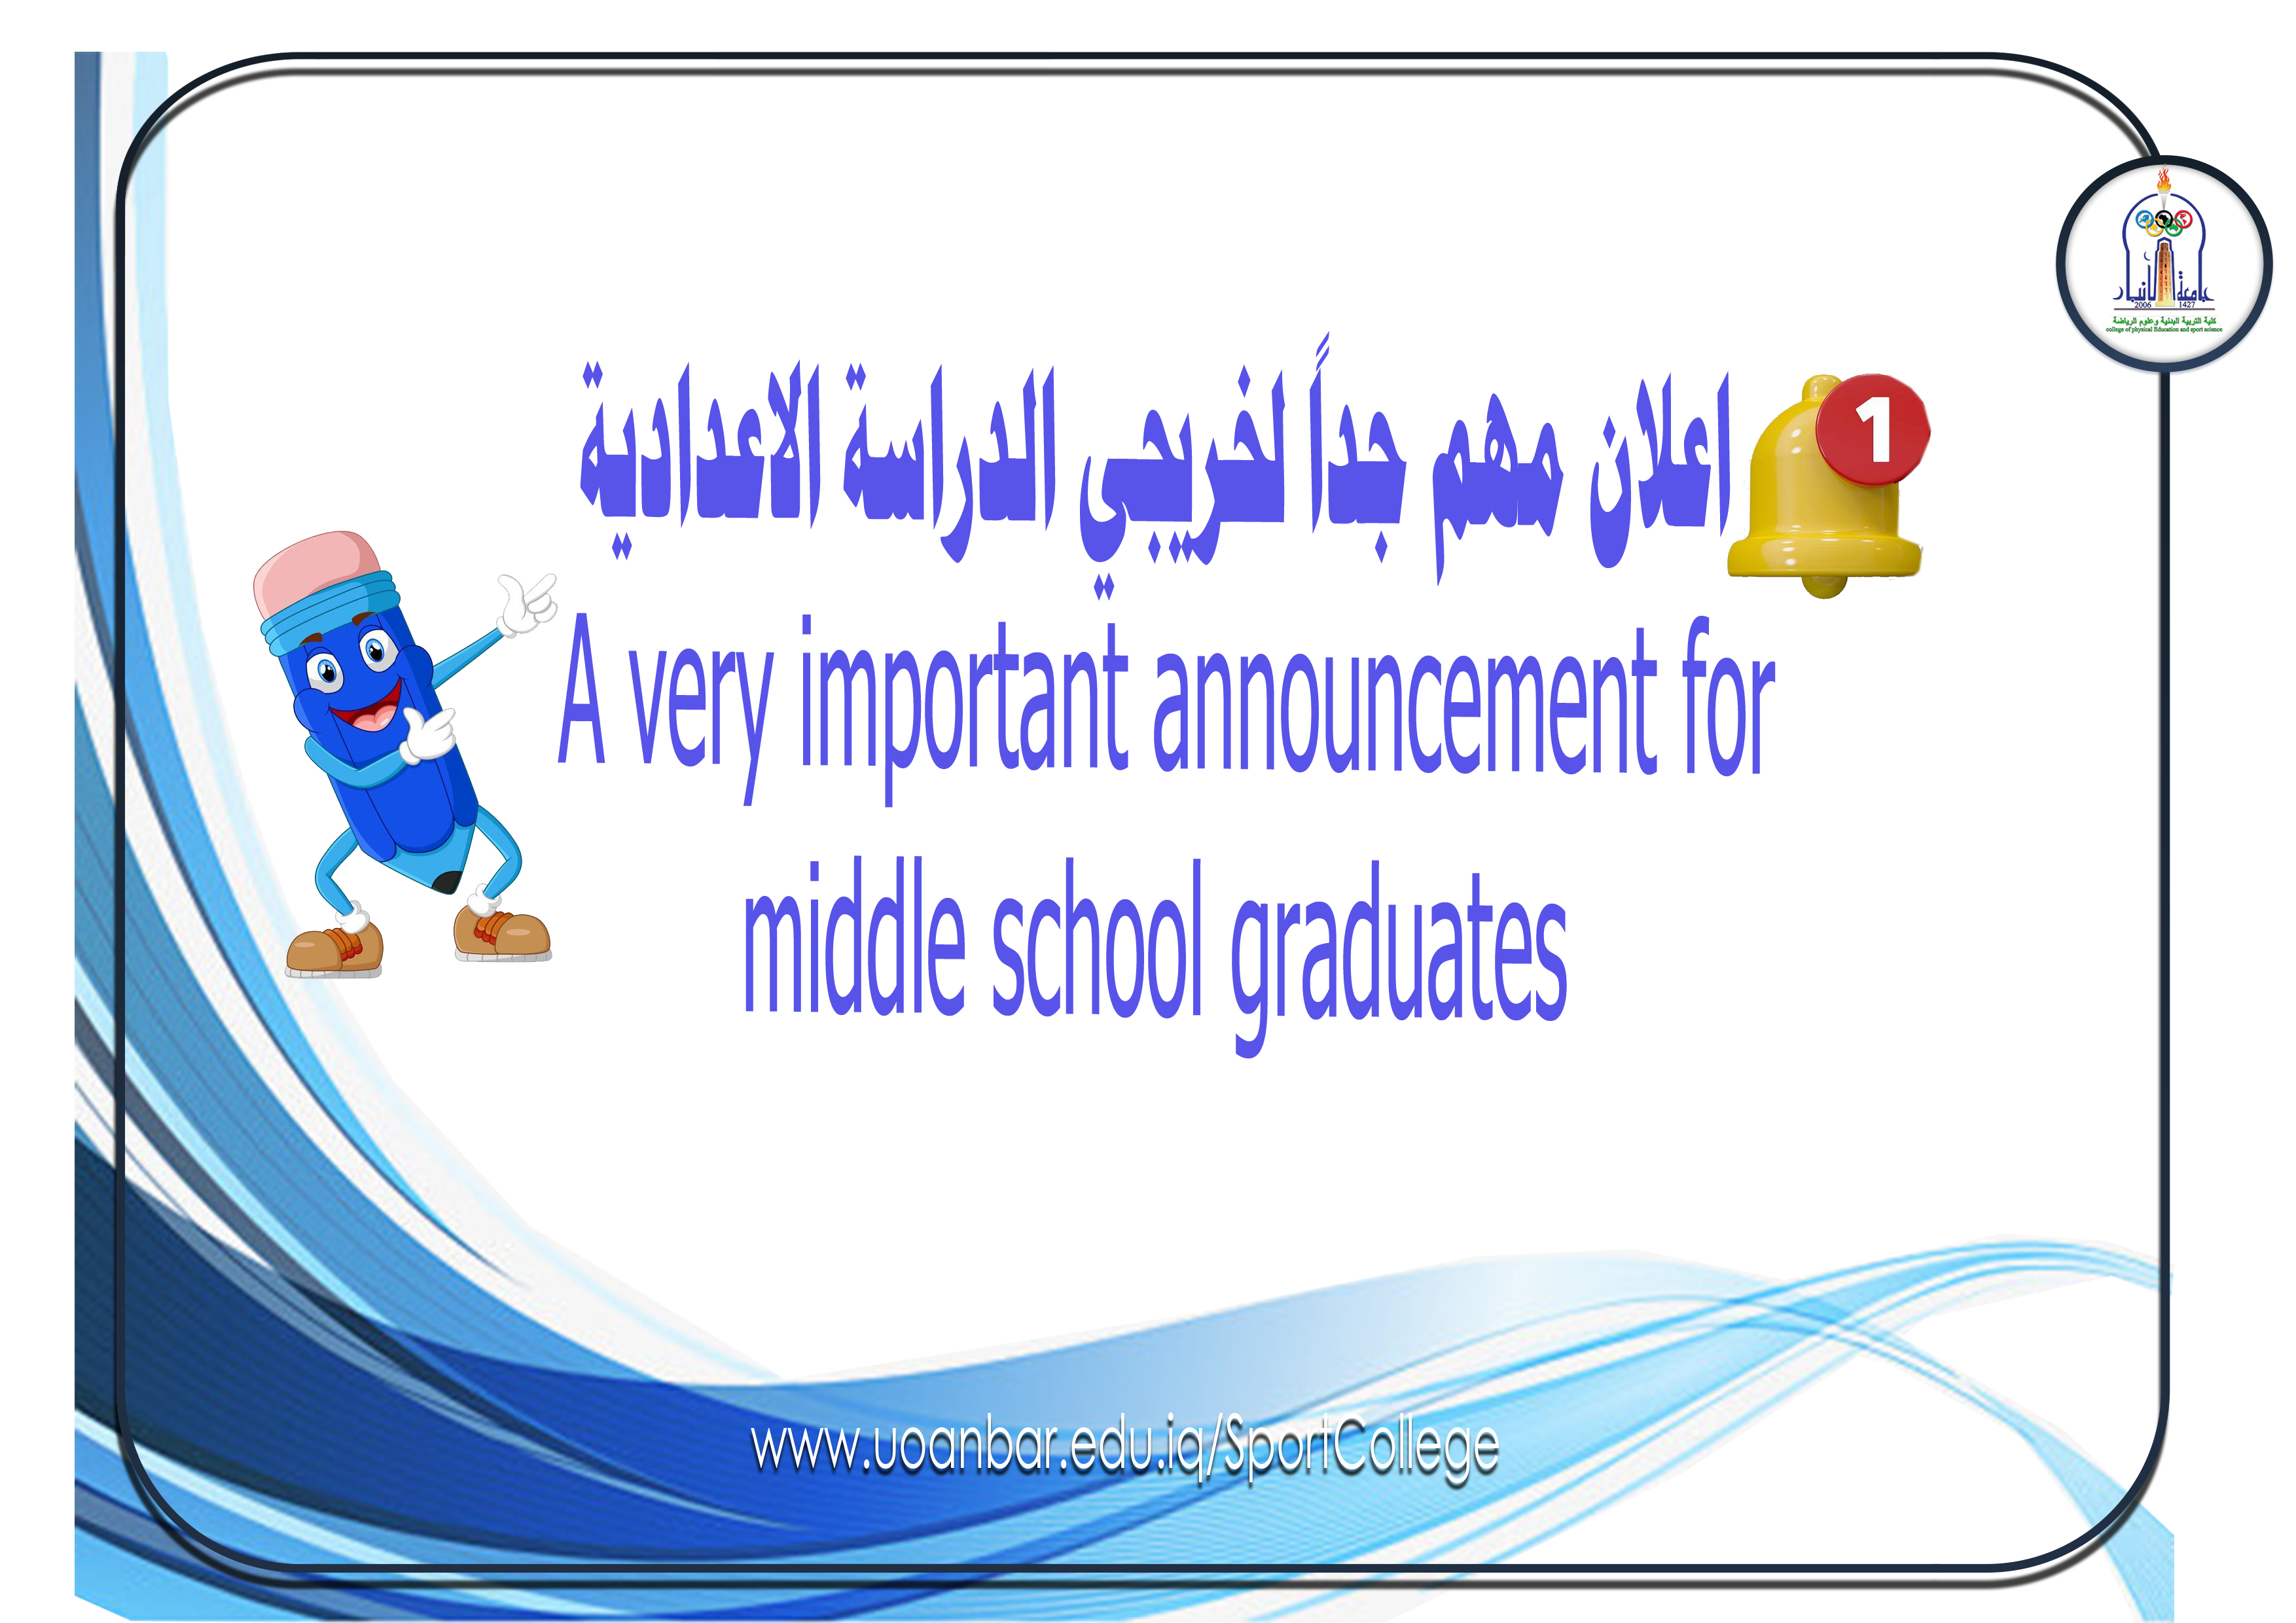 A very important announcement for middle school graduates